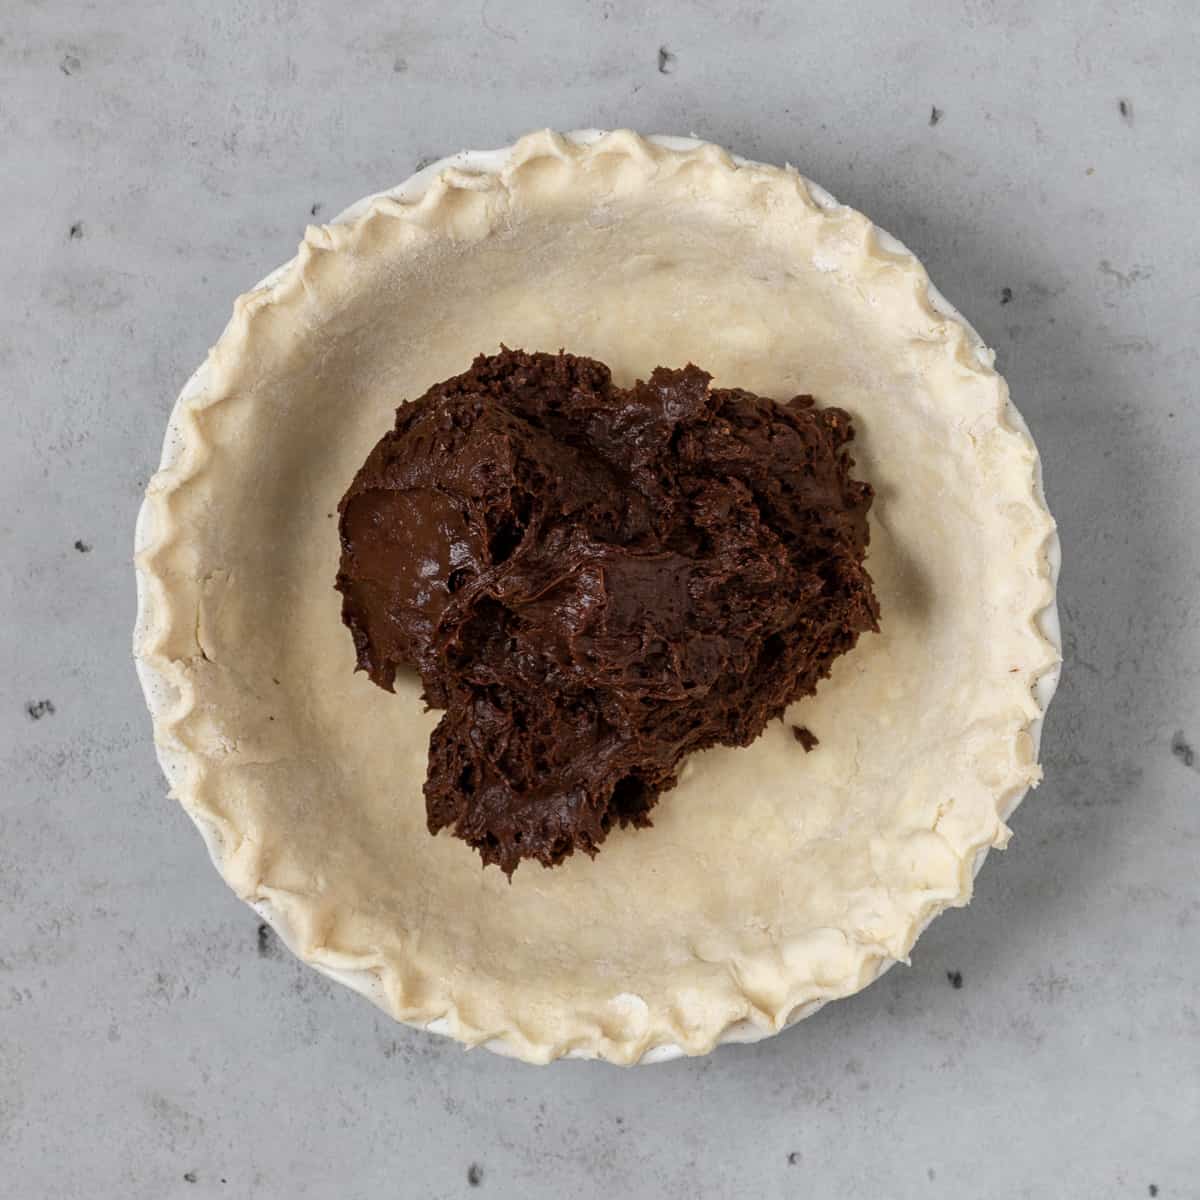 The brownie batter in the prepared pie dough before being baked on a grey background